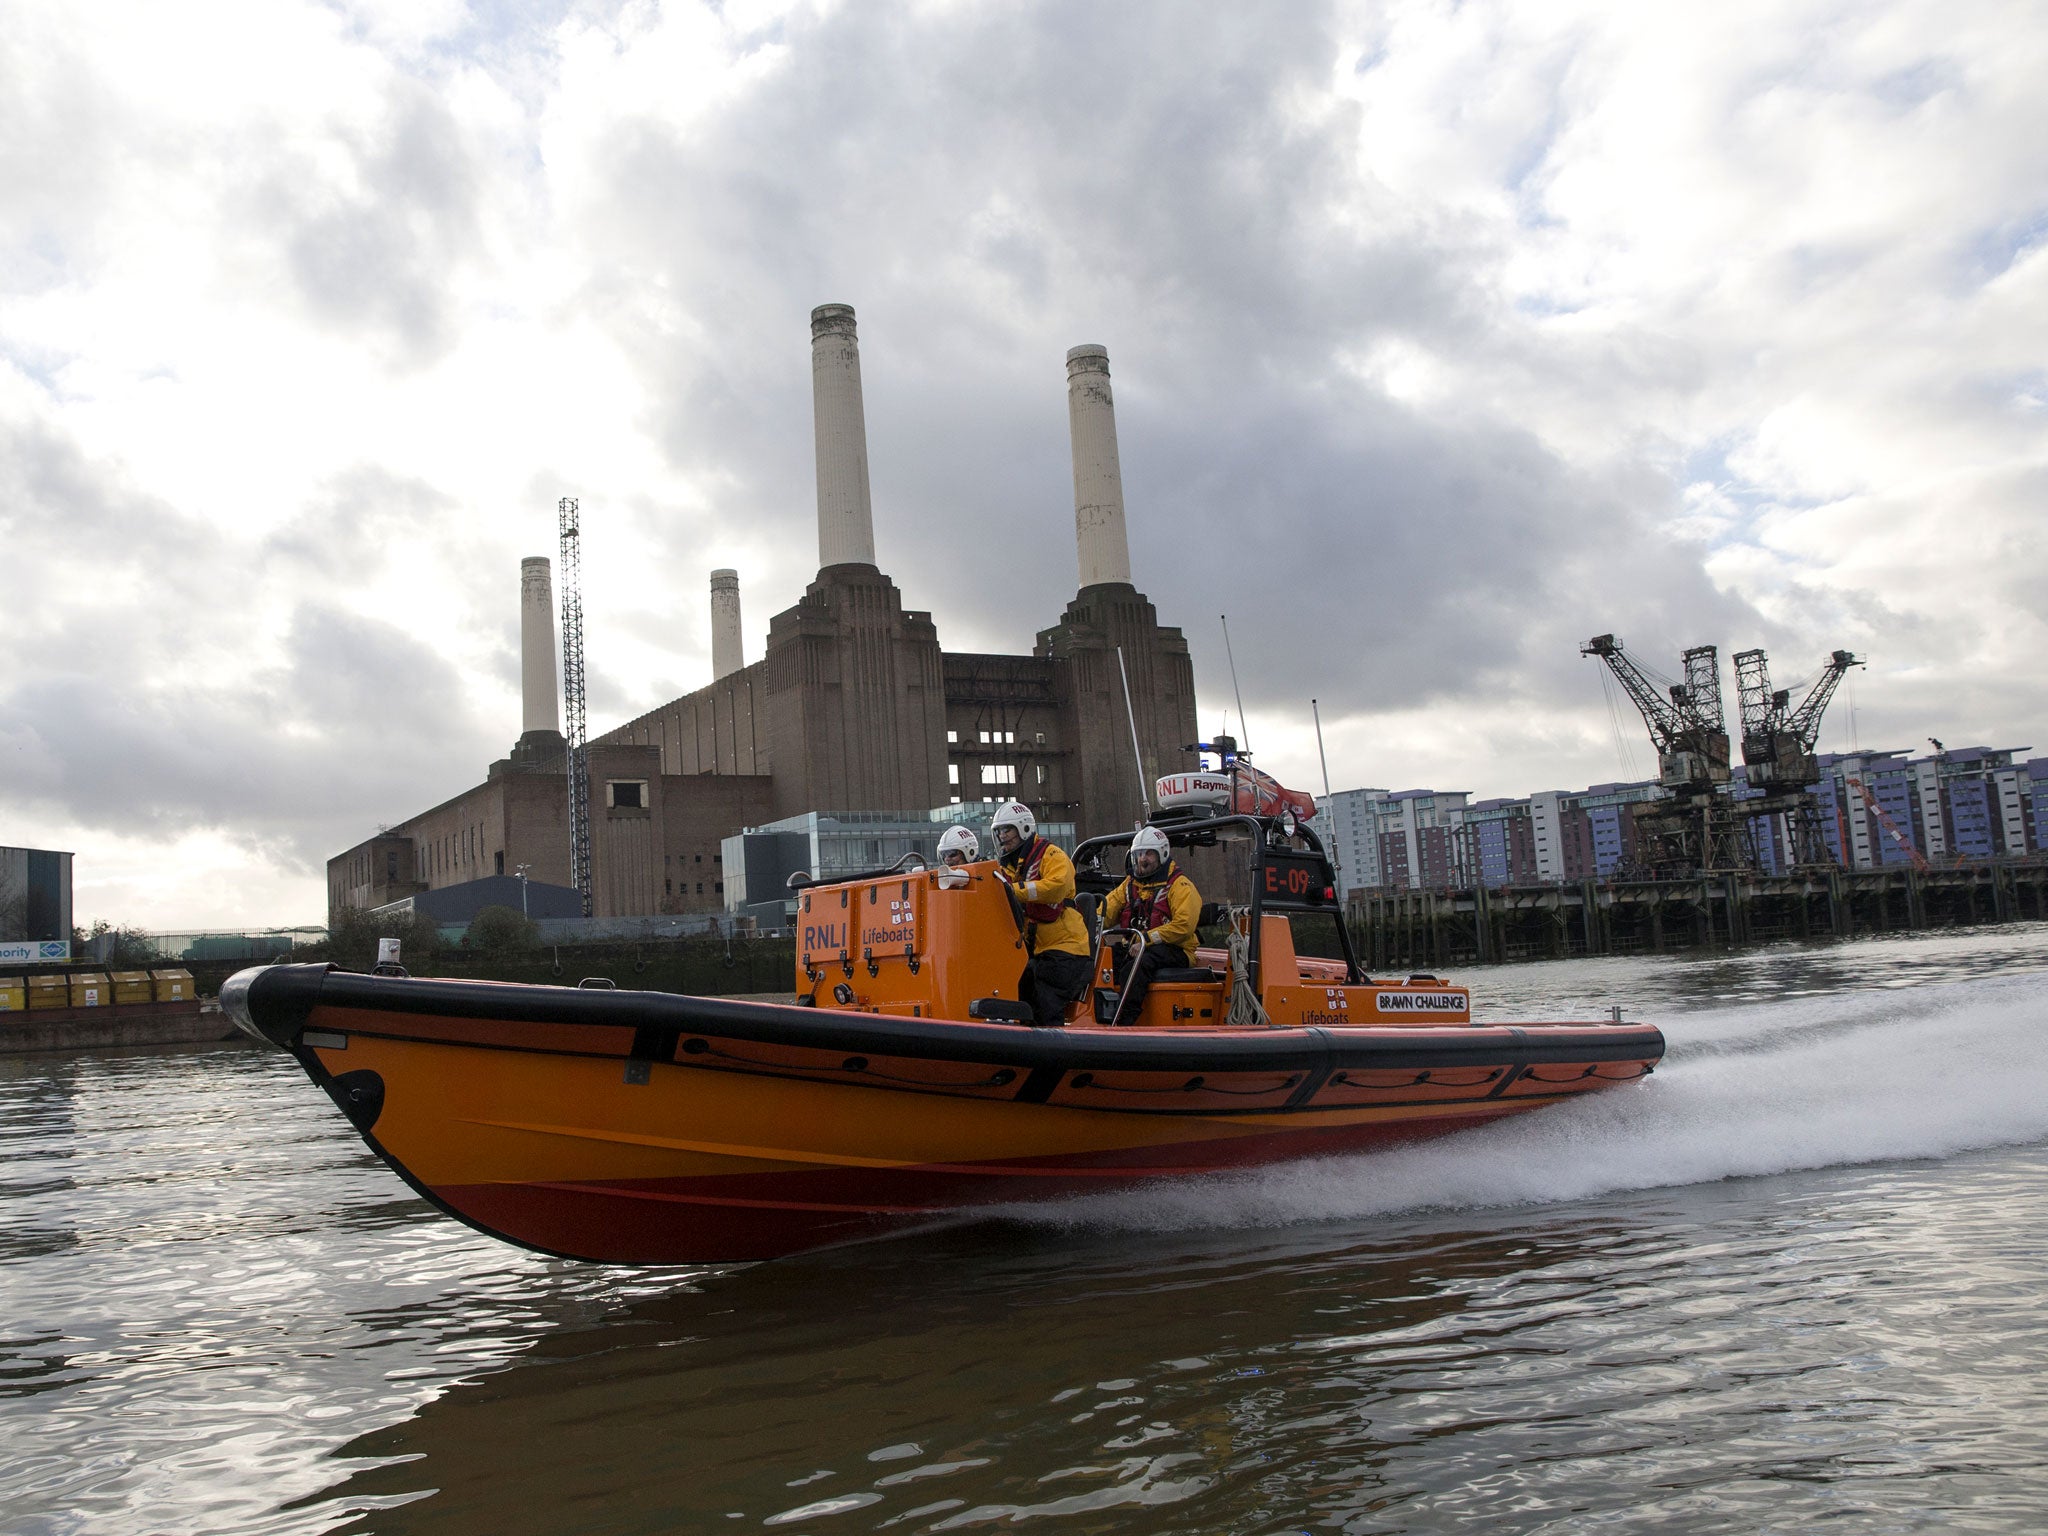 Crew members of the RNLI's Tower Lifeboat station patrol the river Thames.